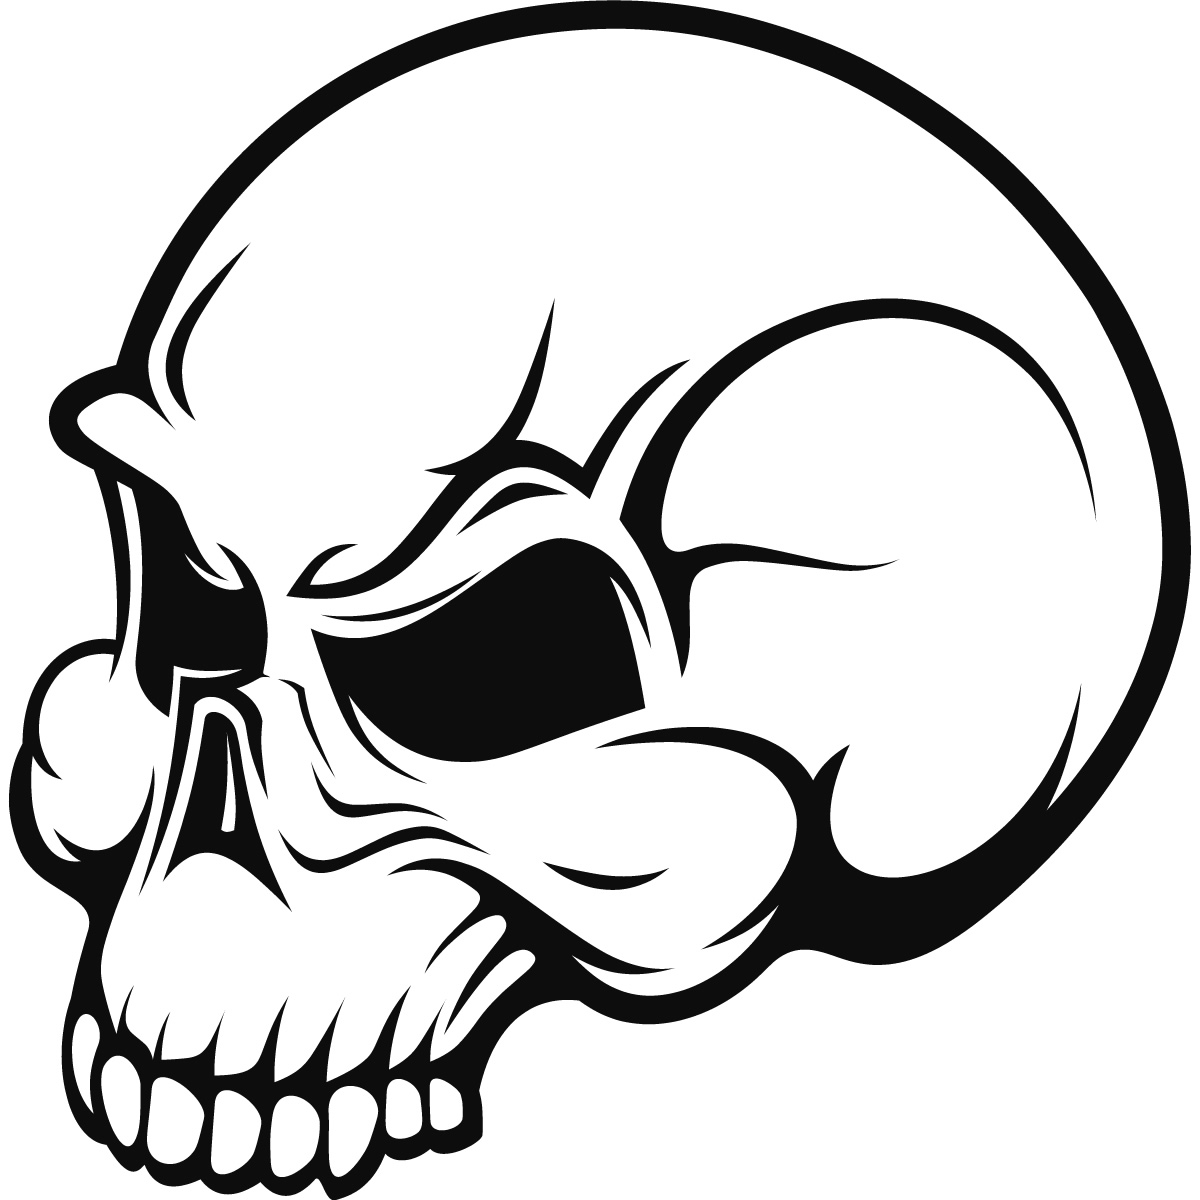 Free Skull Drawing Images, Download Free Skull Drawing Images png